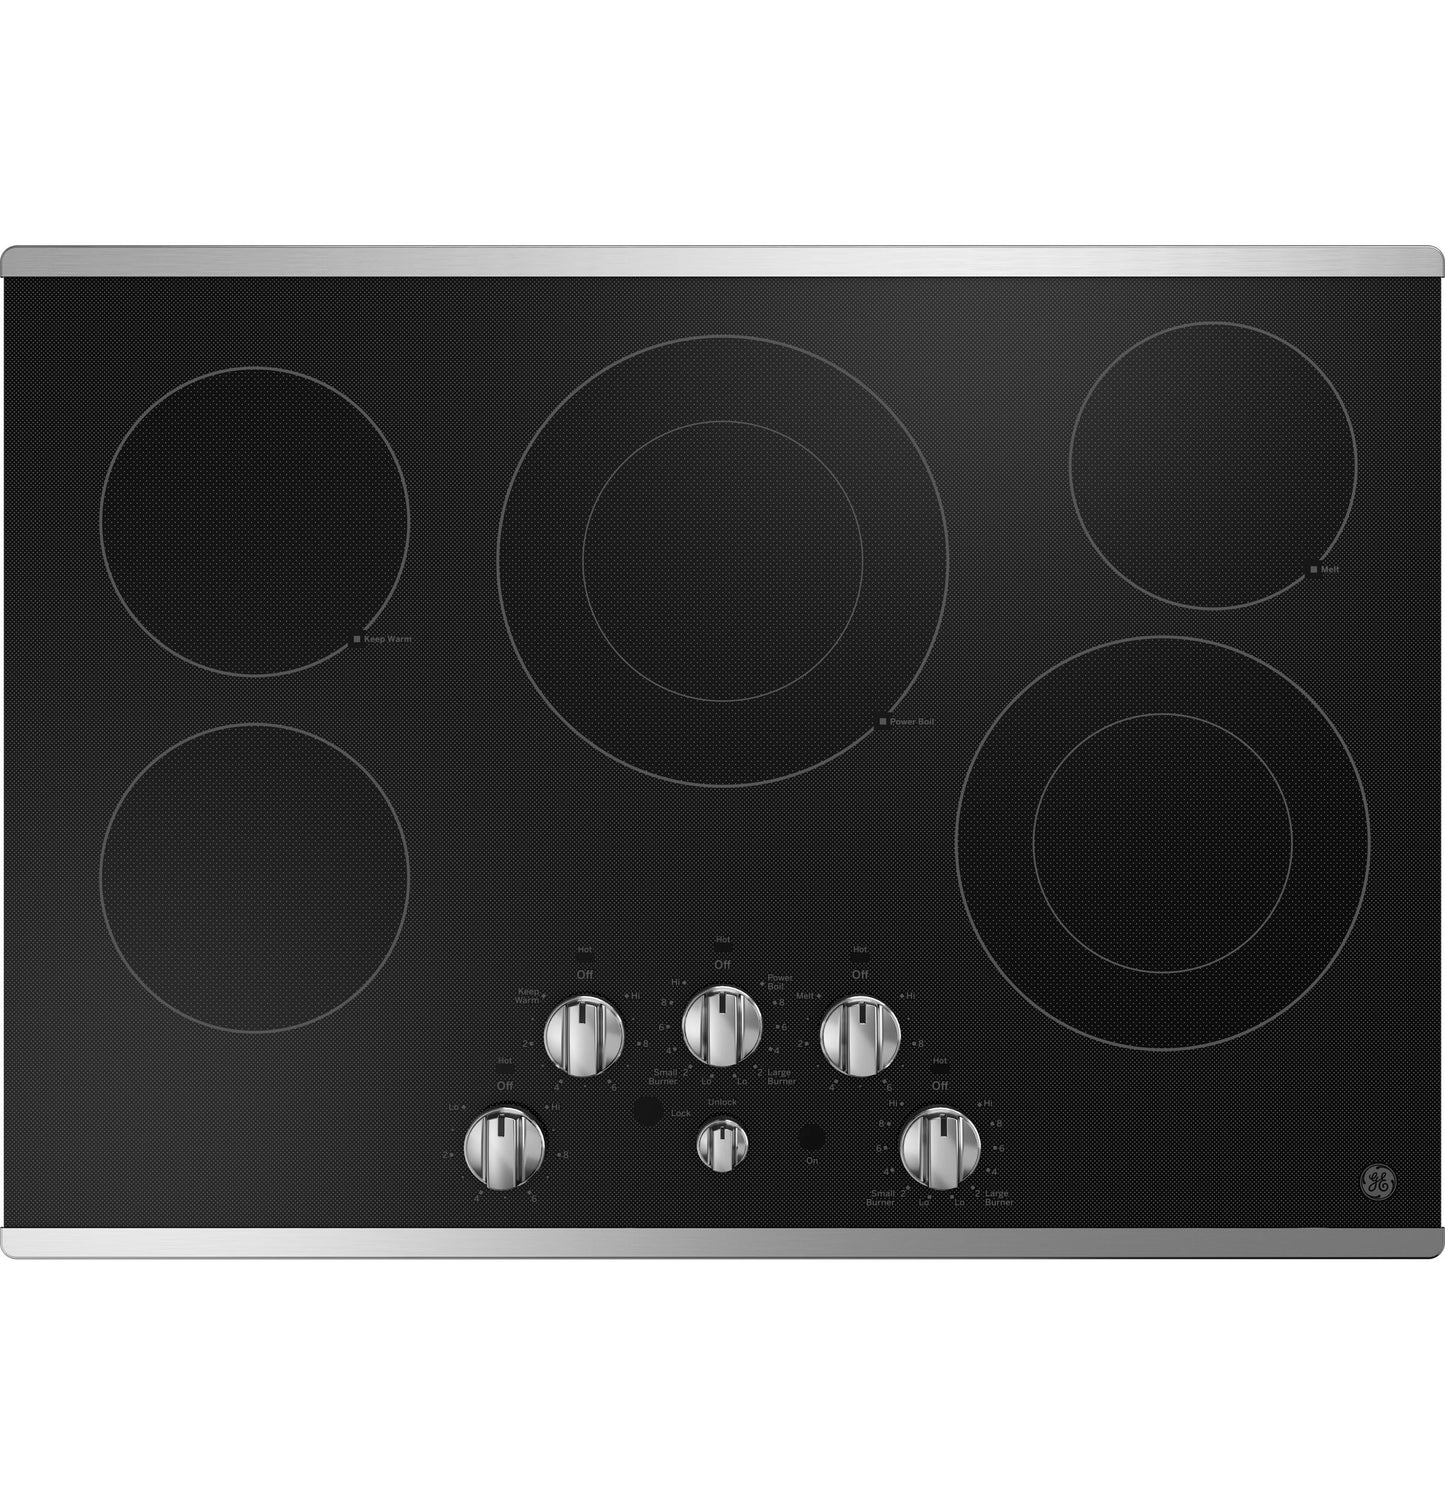 Open box GE 30-in 5 Element Electric Cooktop and 30-in Smart Double Wall Oven paired with 30-in Undercabinet Range Hood Suite in Stainless Steel